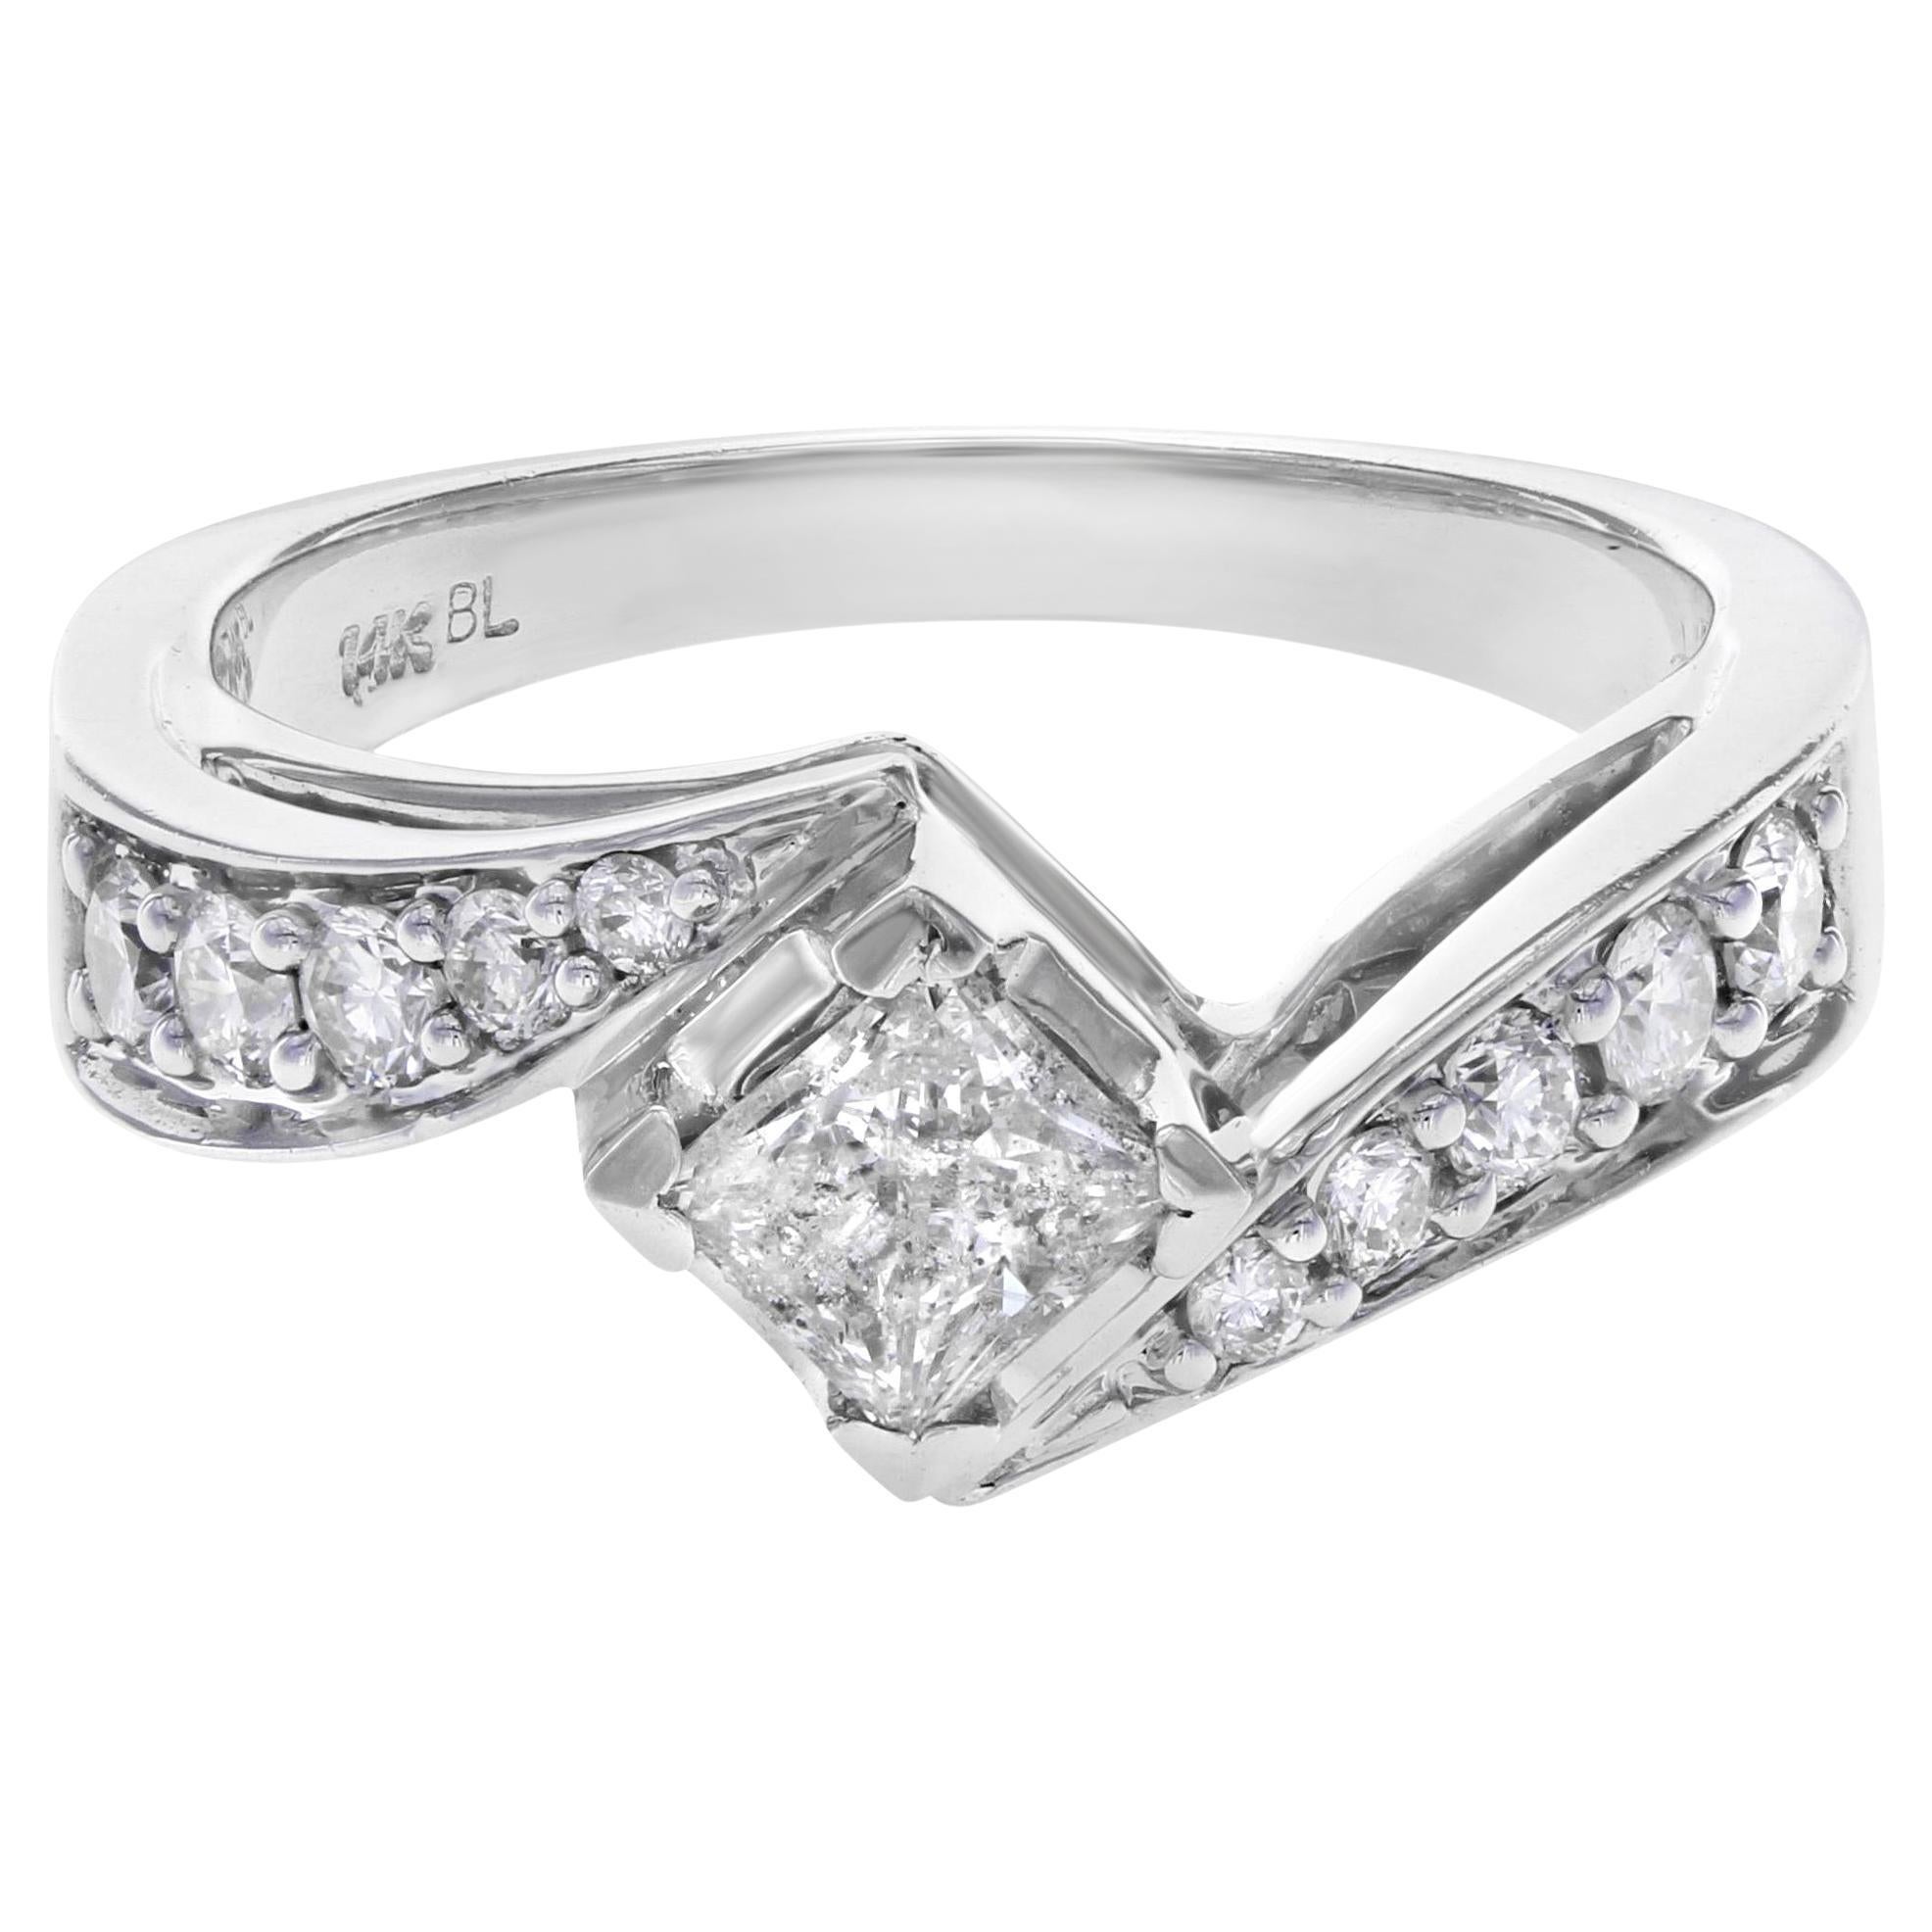 Princess Cut Diamond Accented Ladies Engagement Ring 14K White Gold 1.35Ctw For Sale